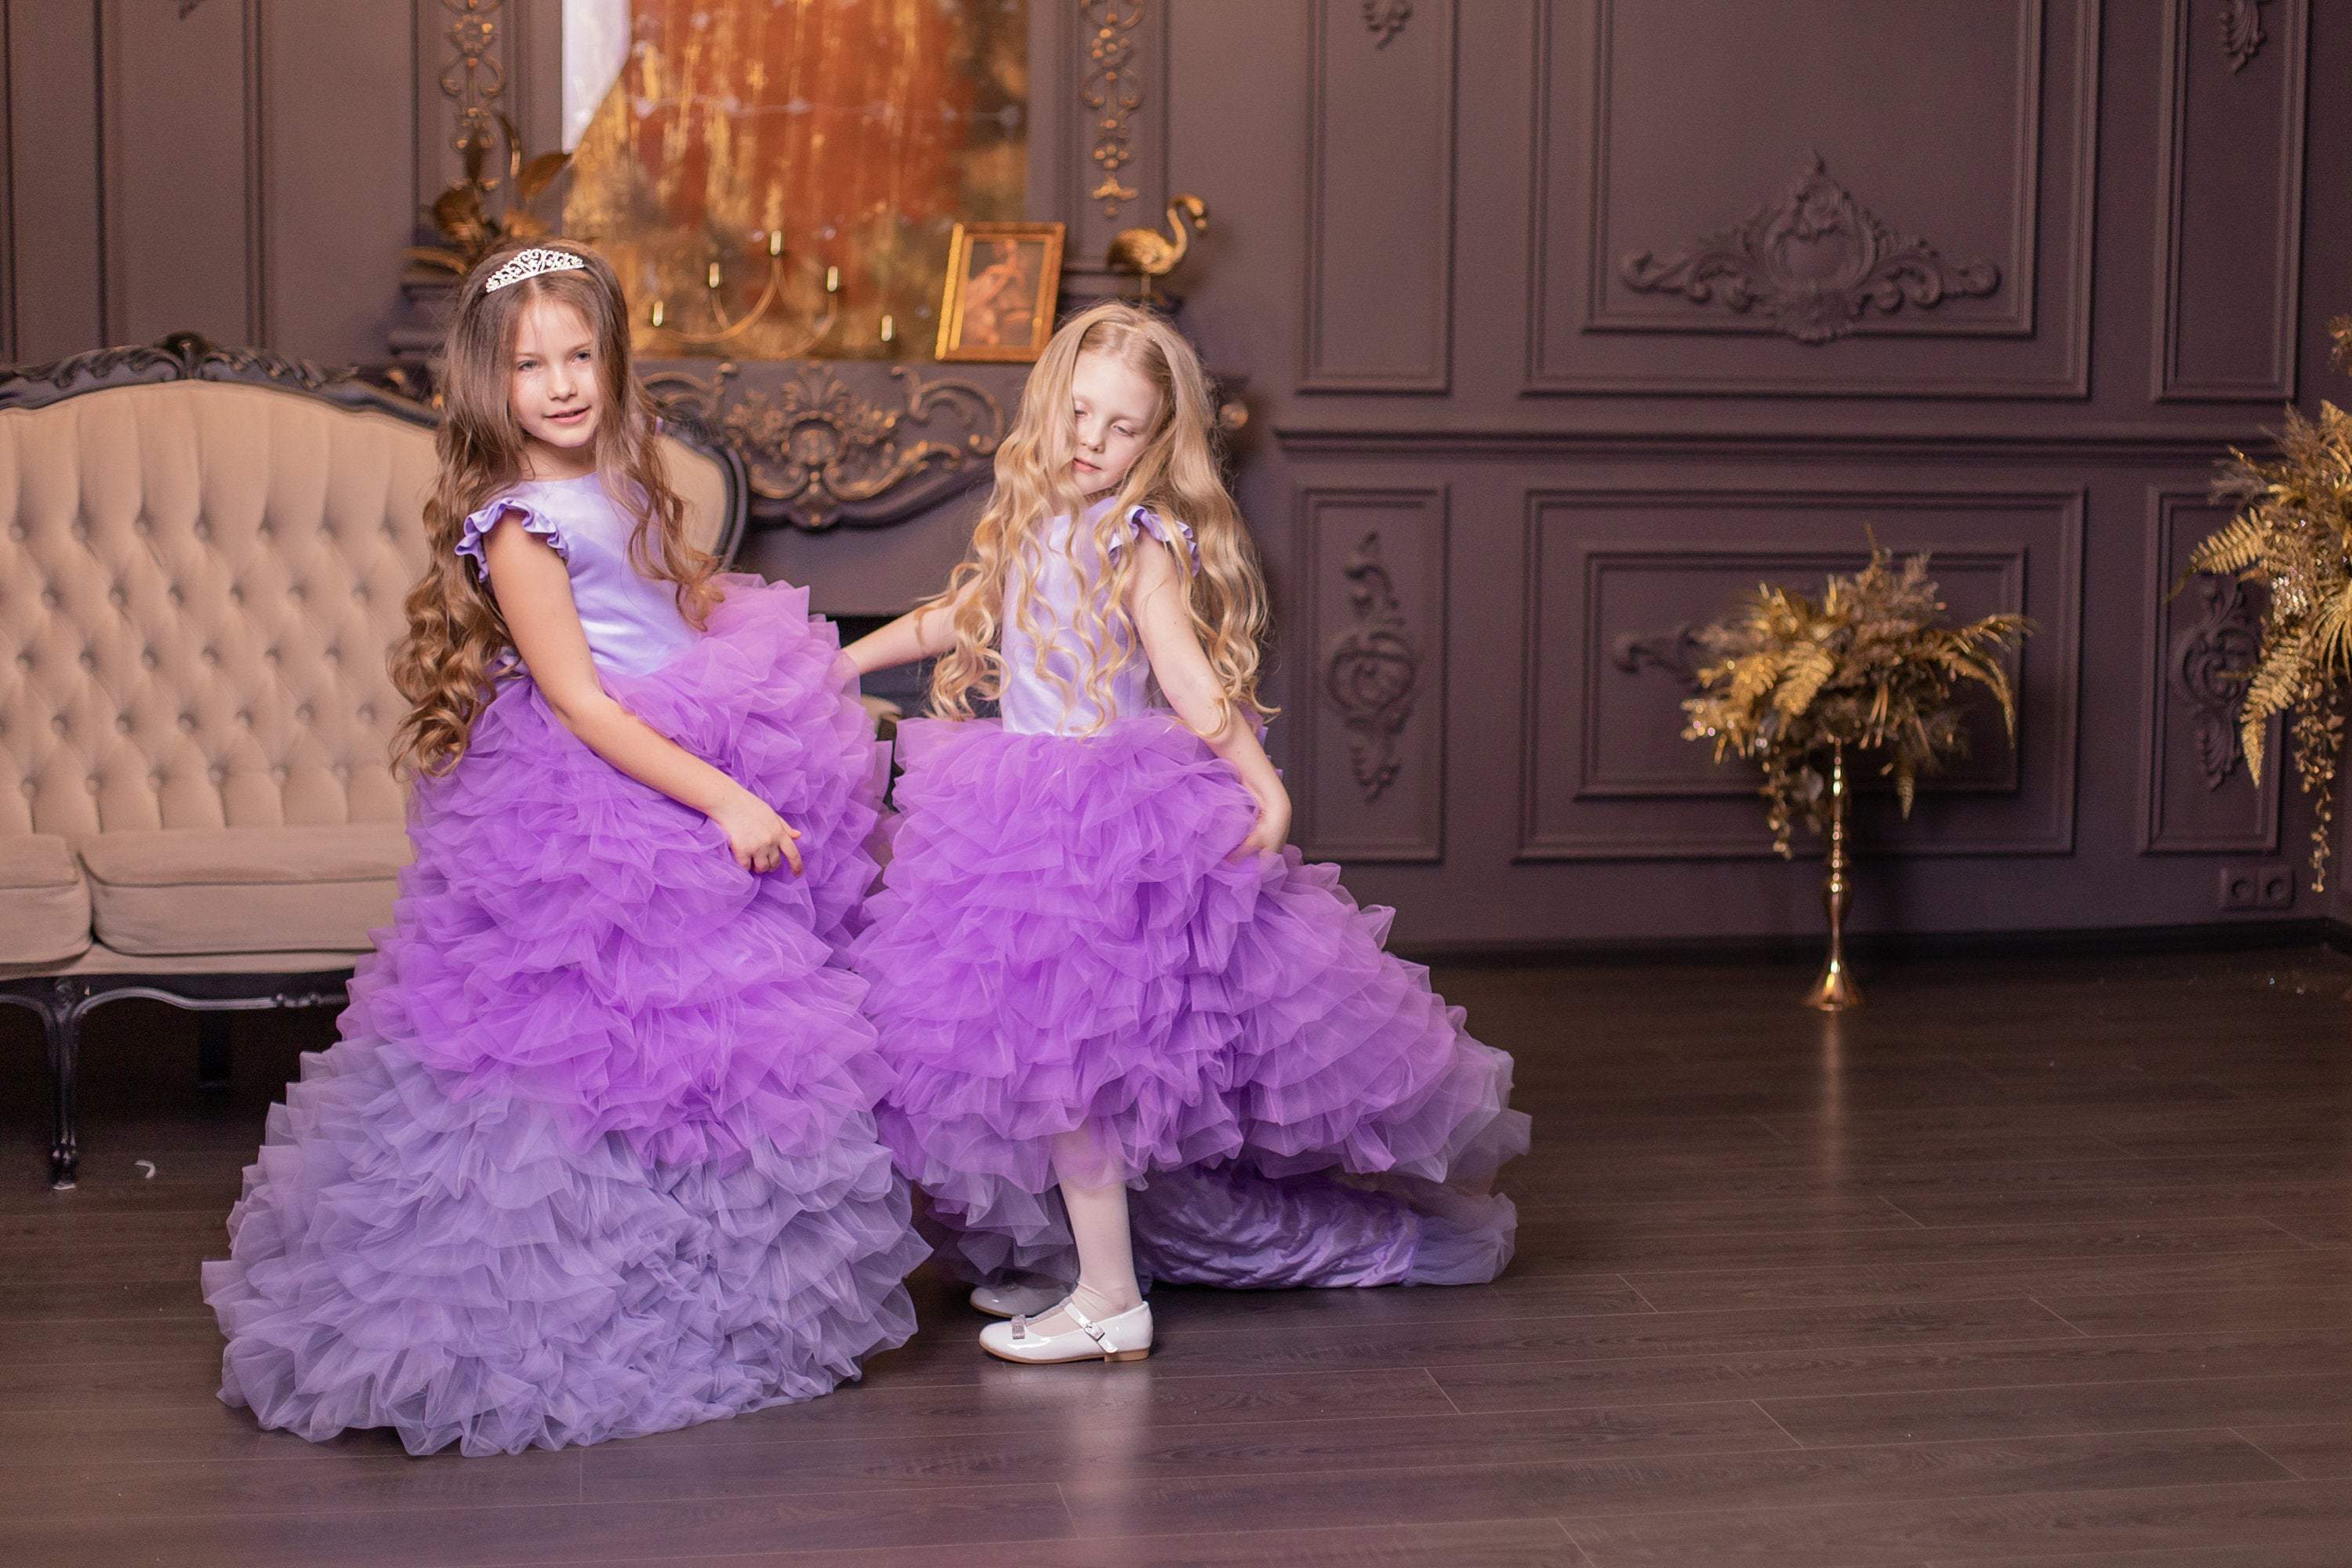 How to Dress Your little Girl like Real Princess